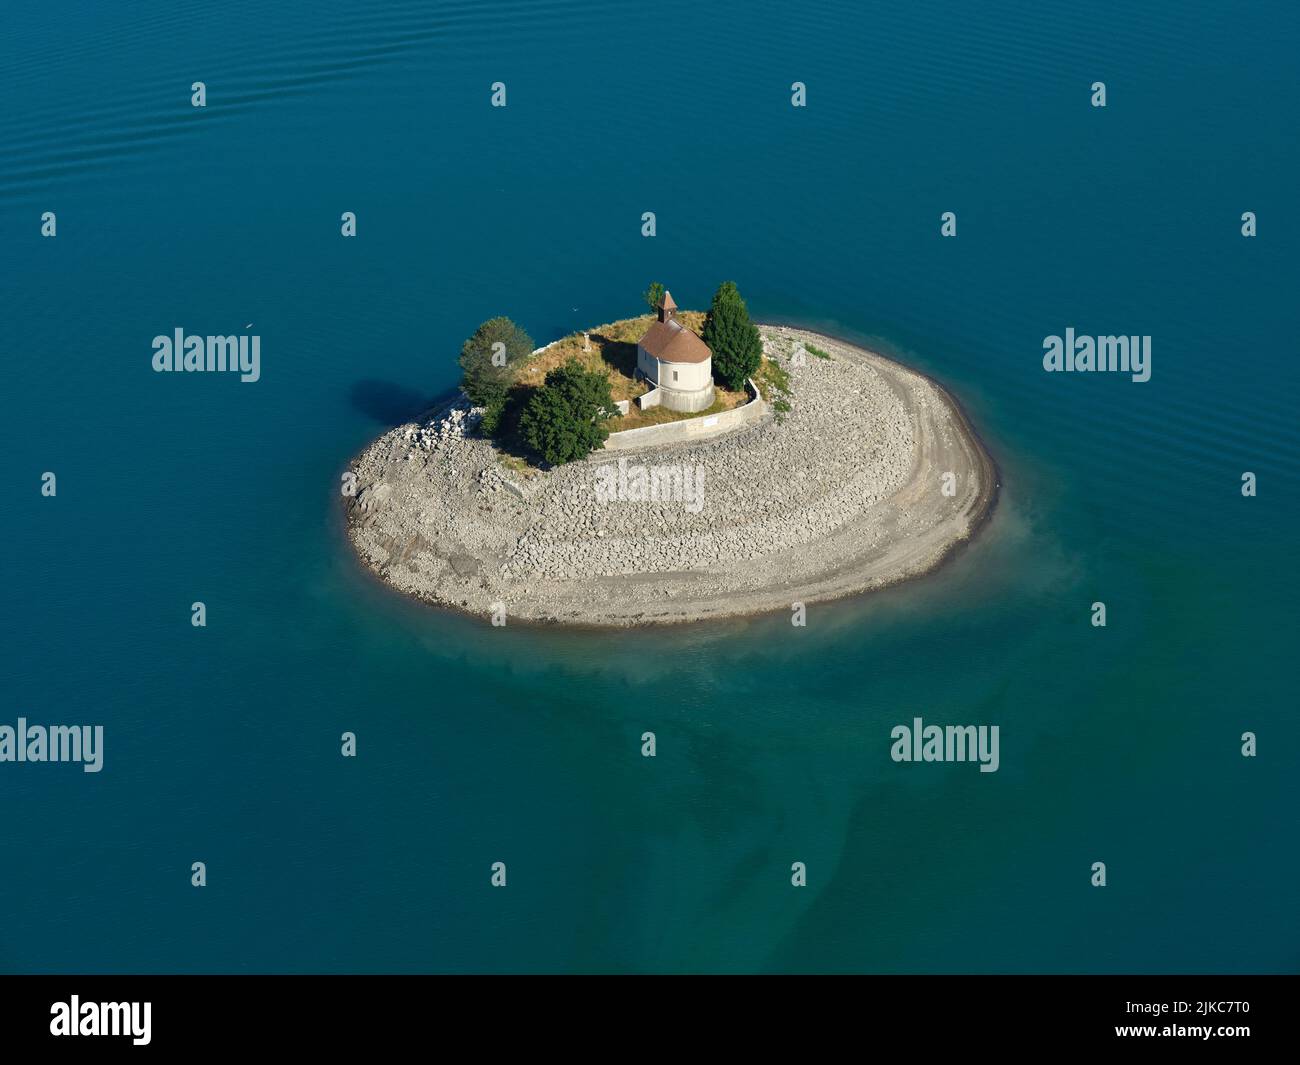 AERIAL VIEW. Chapel on an island surrounded by turquoise waters. Saint-Michel Island, Prunières, Lake Serre-Ponçon, Hautes-Alpes, France. Stock Photo